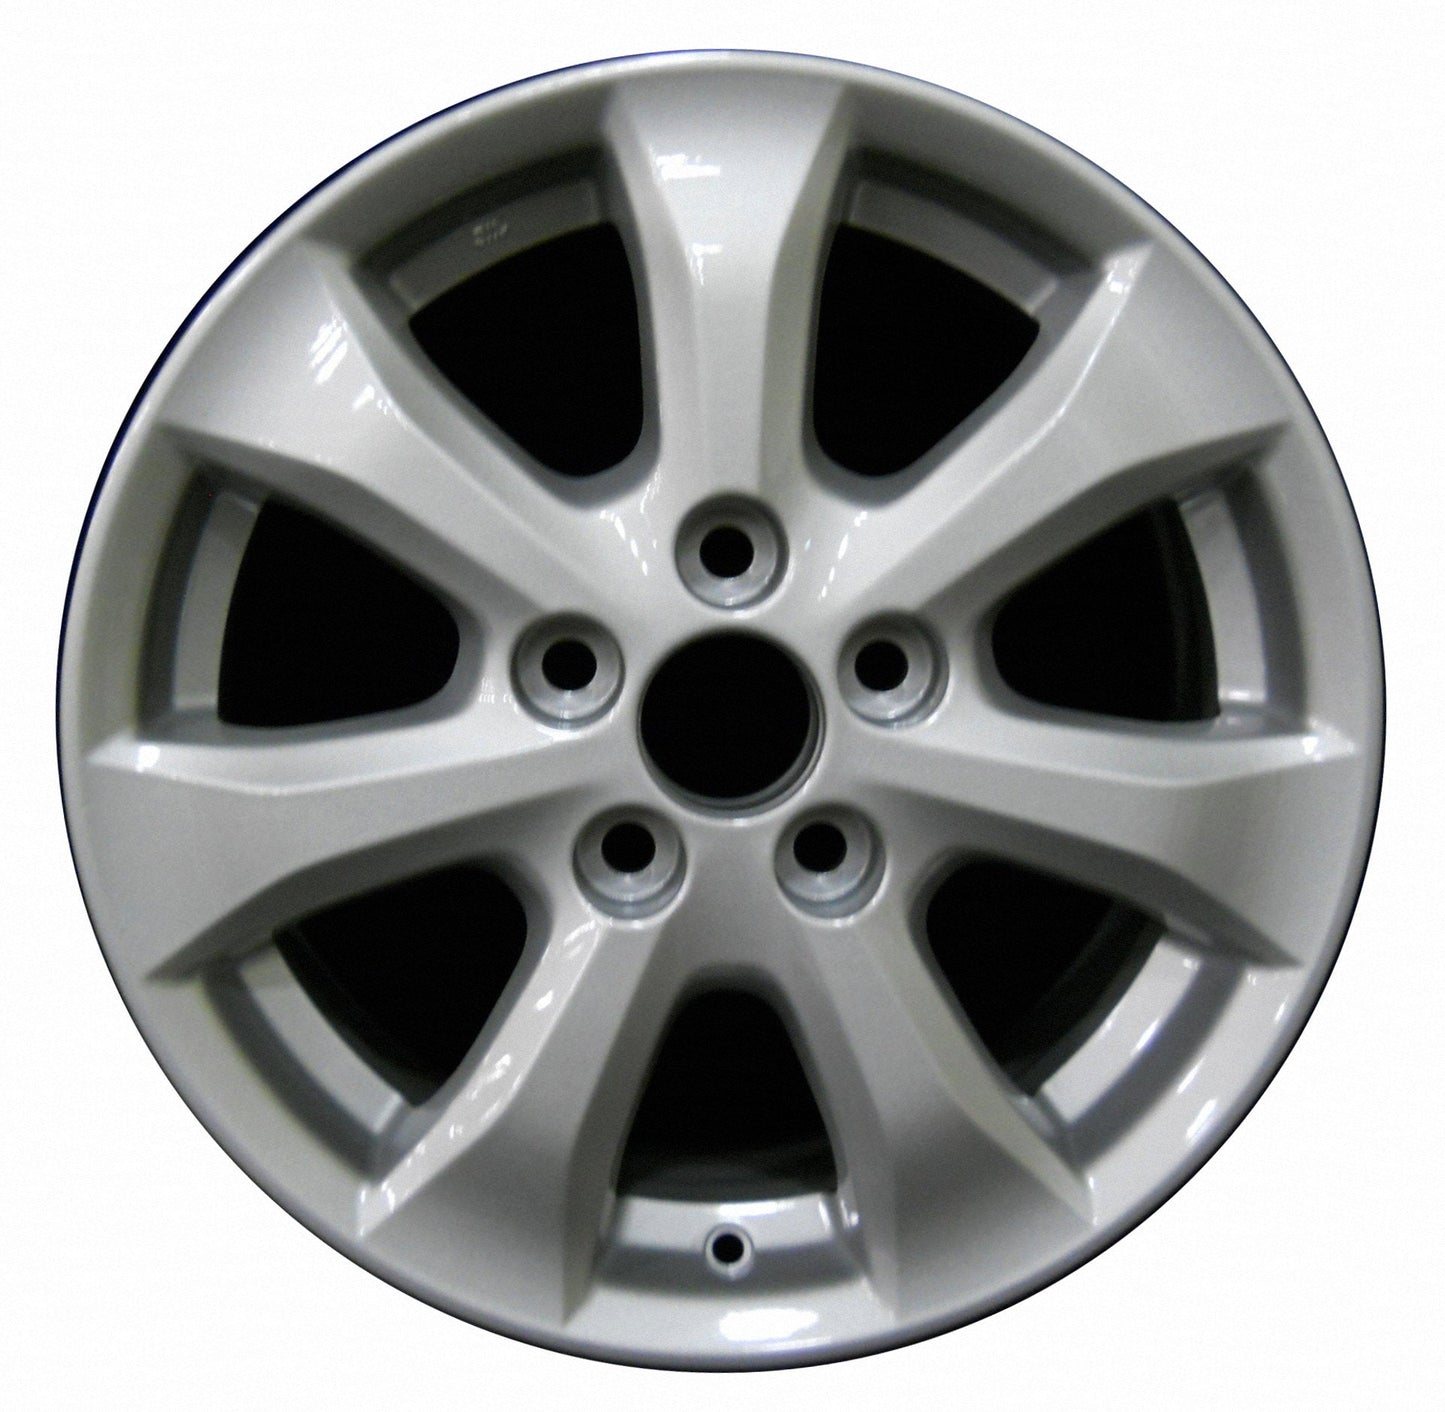 Toyota Camry  2007, 2008, 2009, 2010, 2011 Factory OEM Car Wheel Size 16x6.5 Alloy WAO.69495.LS08.FF